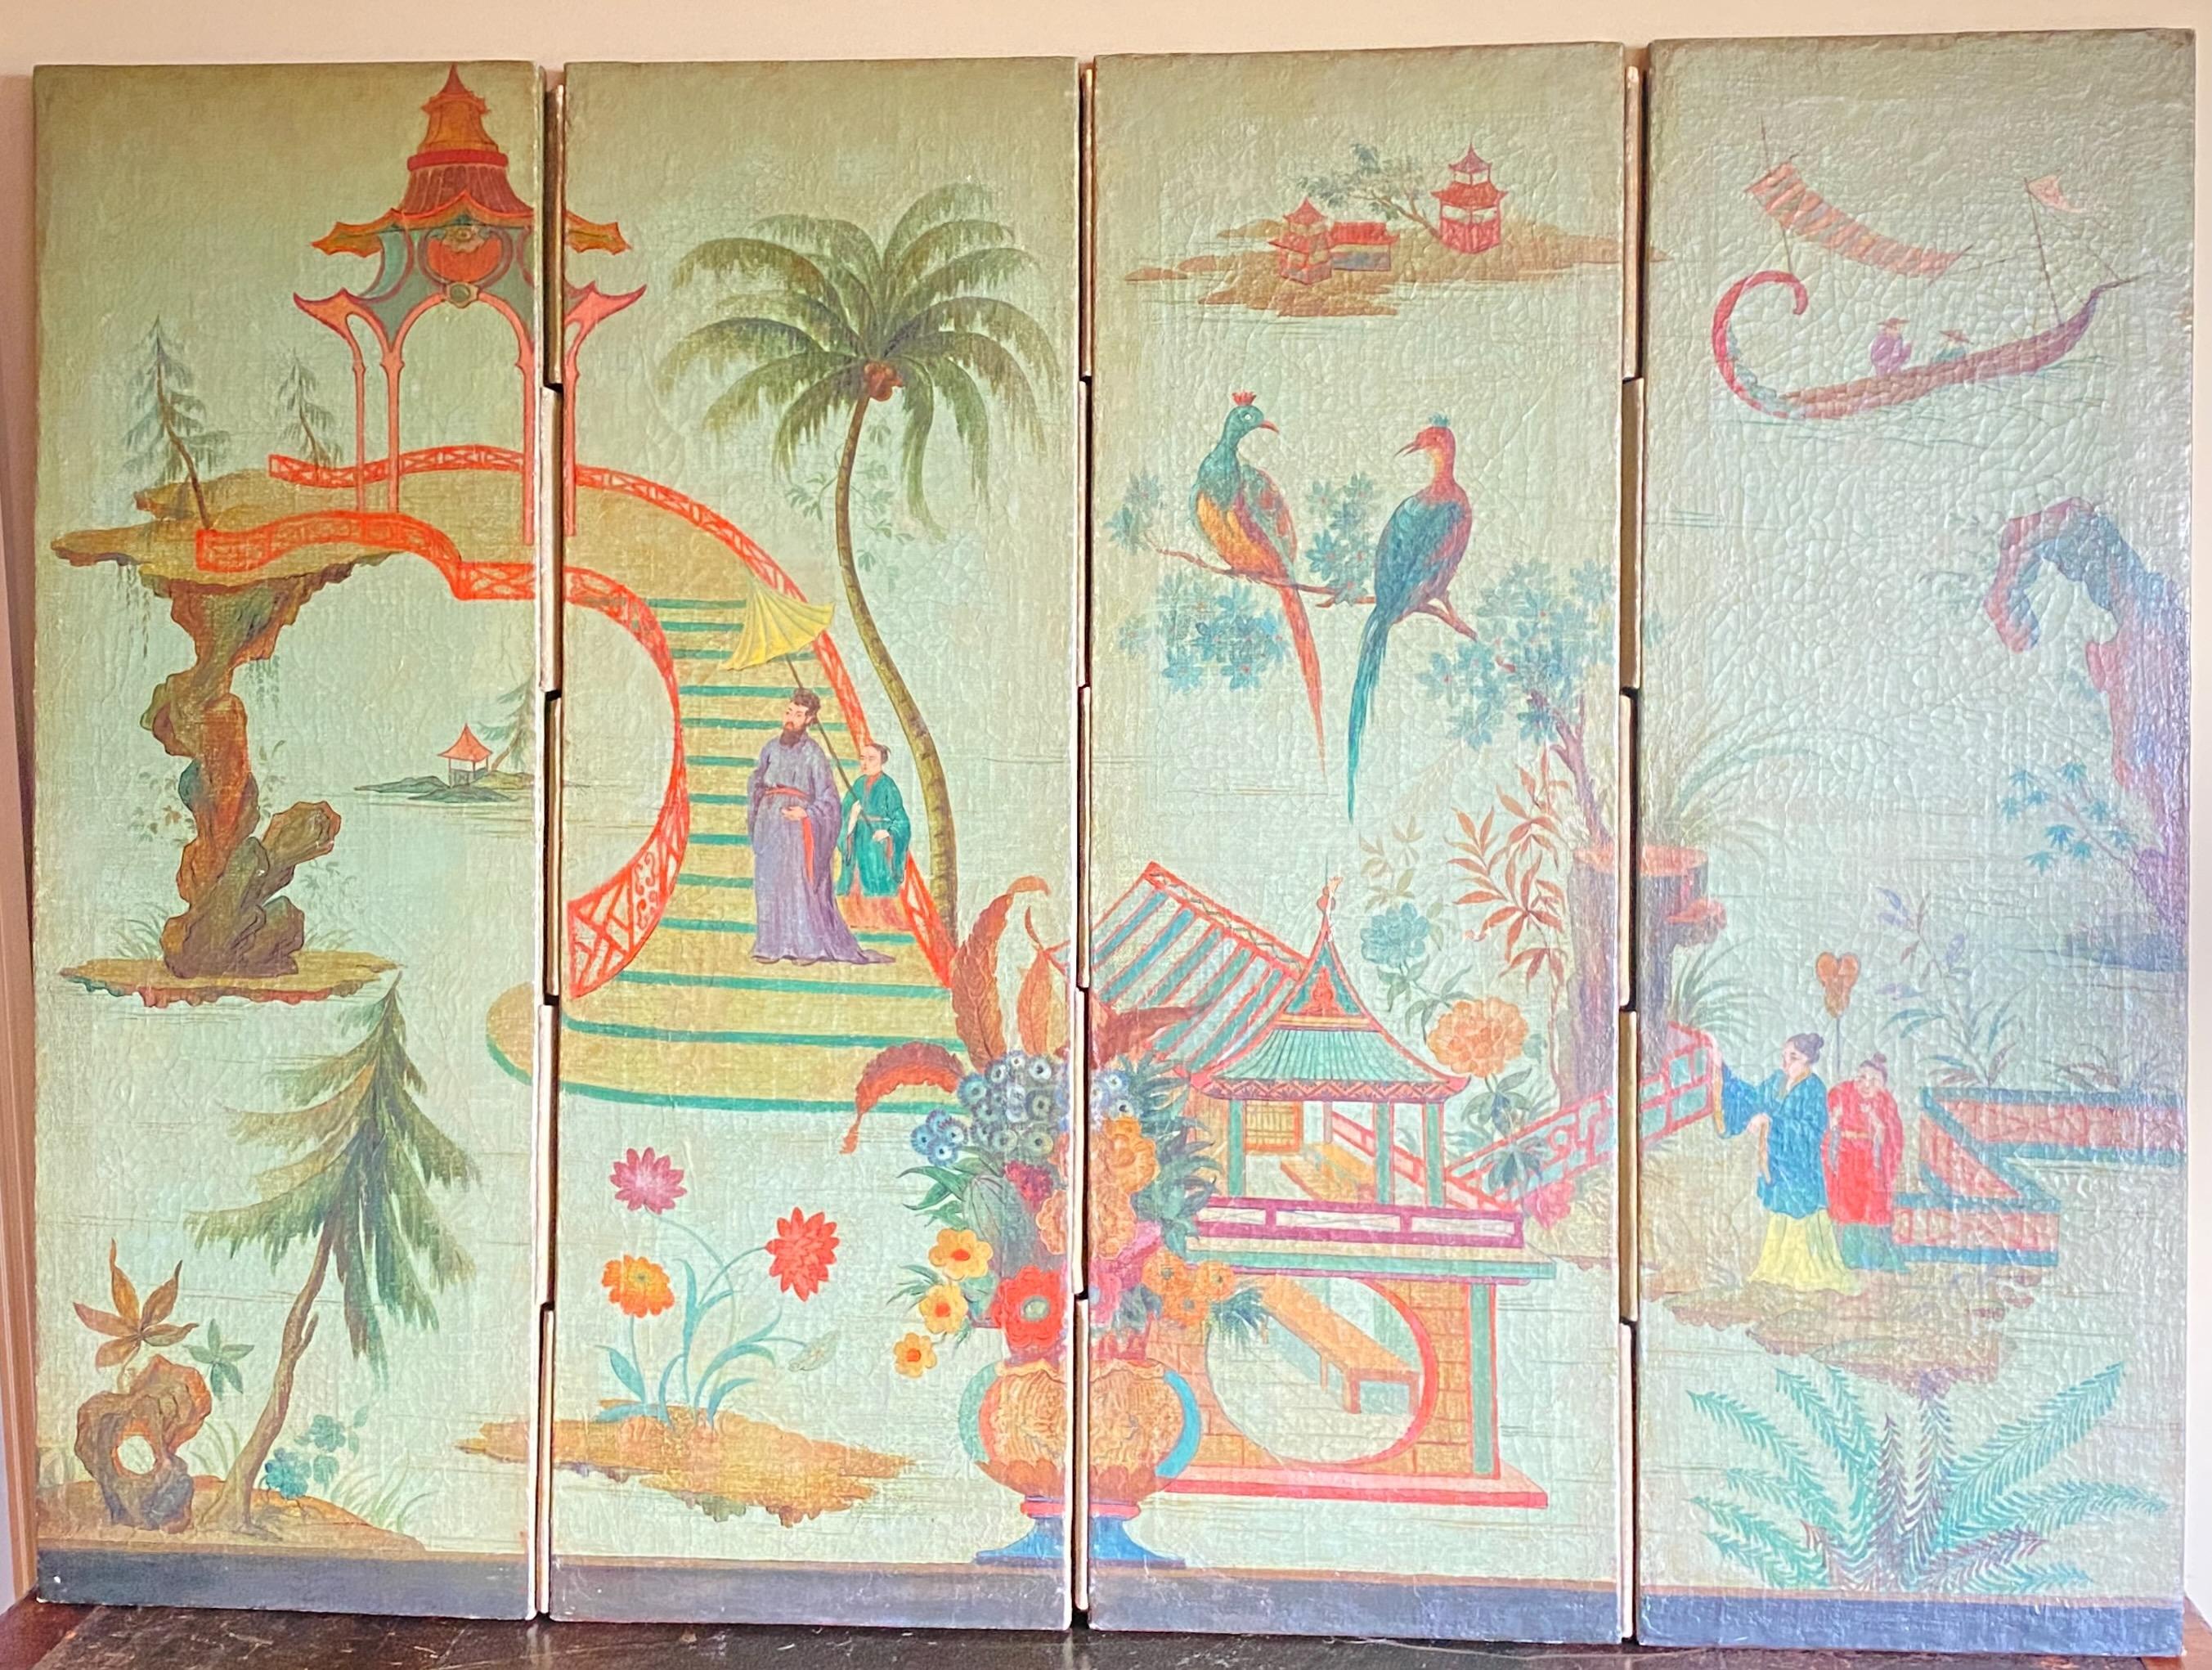 Beautifully hand painted scenic Chinoiserie style folding screen. Also can be displayed flush mounted to wall.
Oil on canvas, stretched on original 19th century wooden frame. Most likely this was part of a much larger mural at one time, and reduced